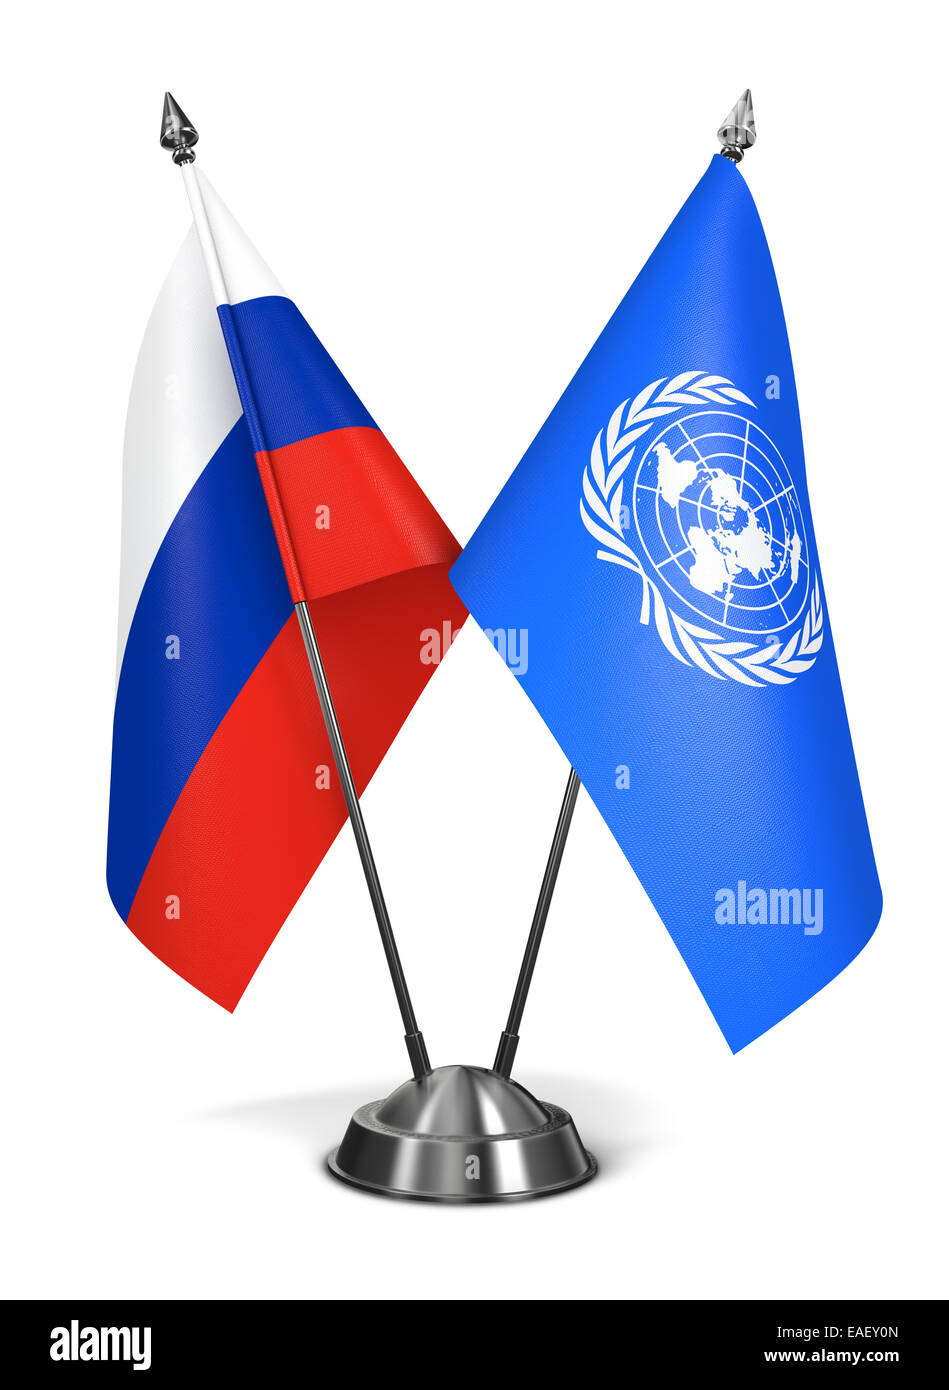 United Nations Headquarters Flags Cut Out Stock Images And Pictures Alamy 8522